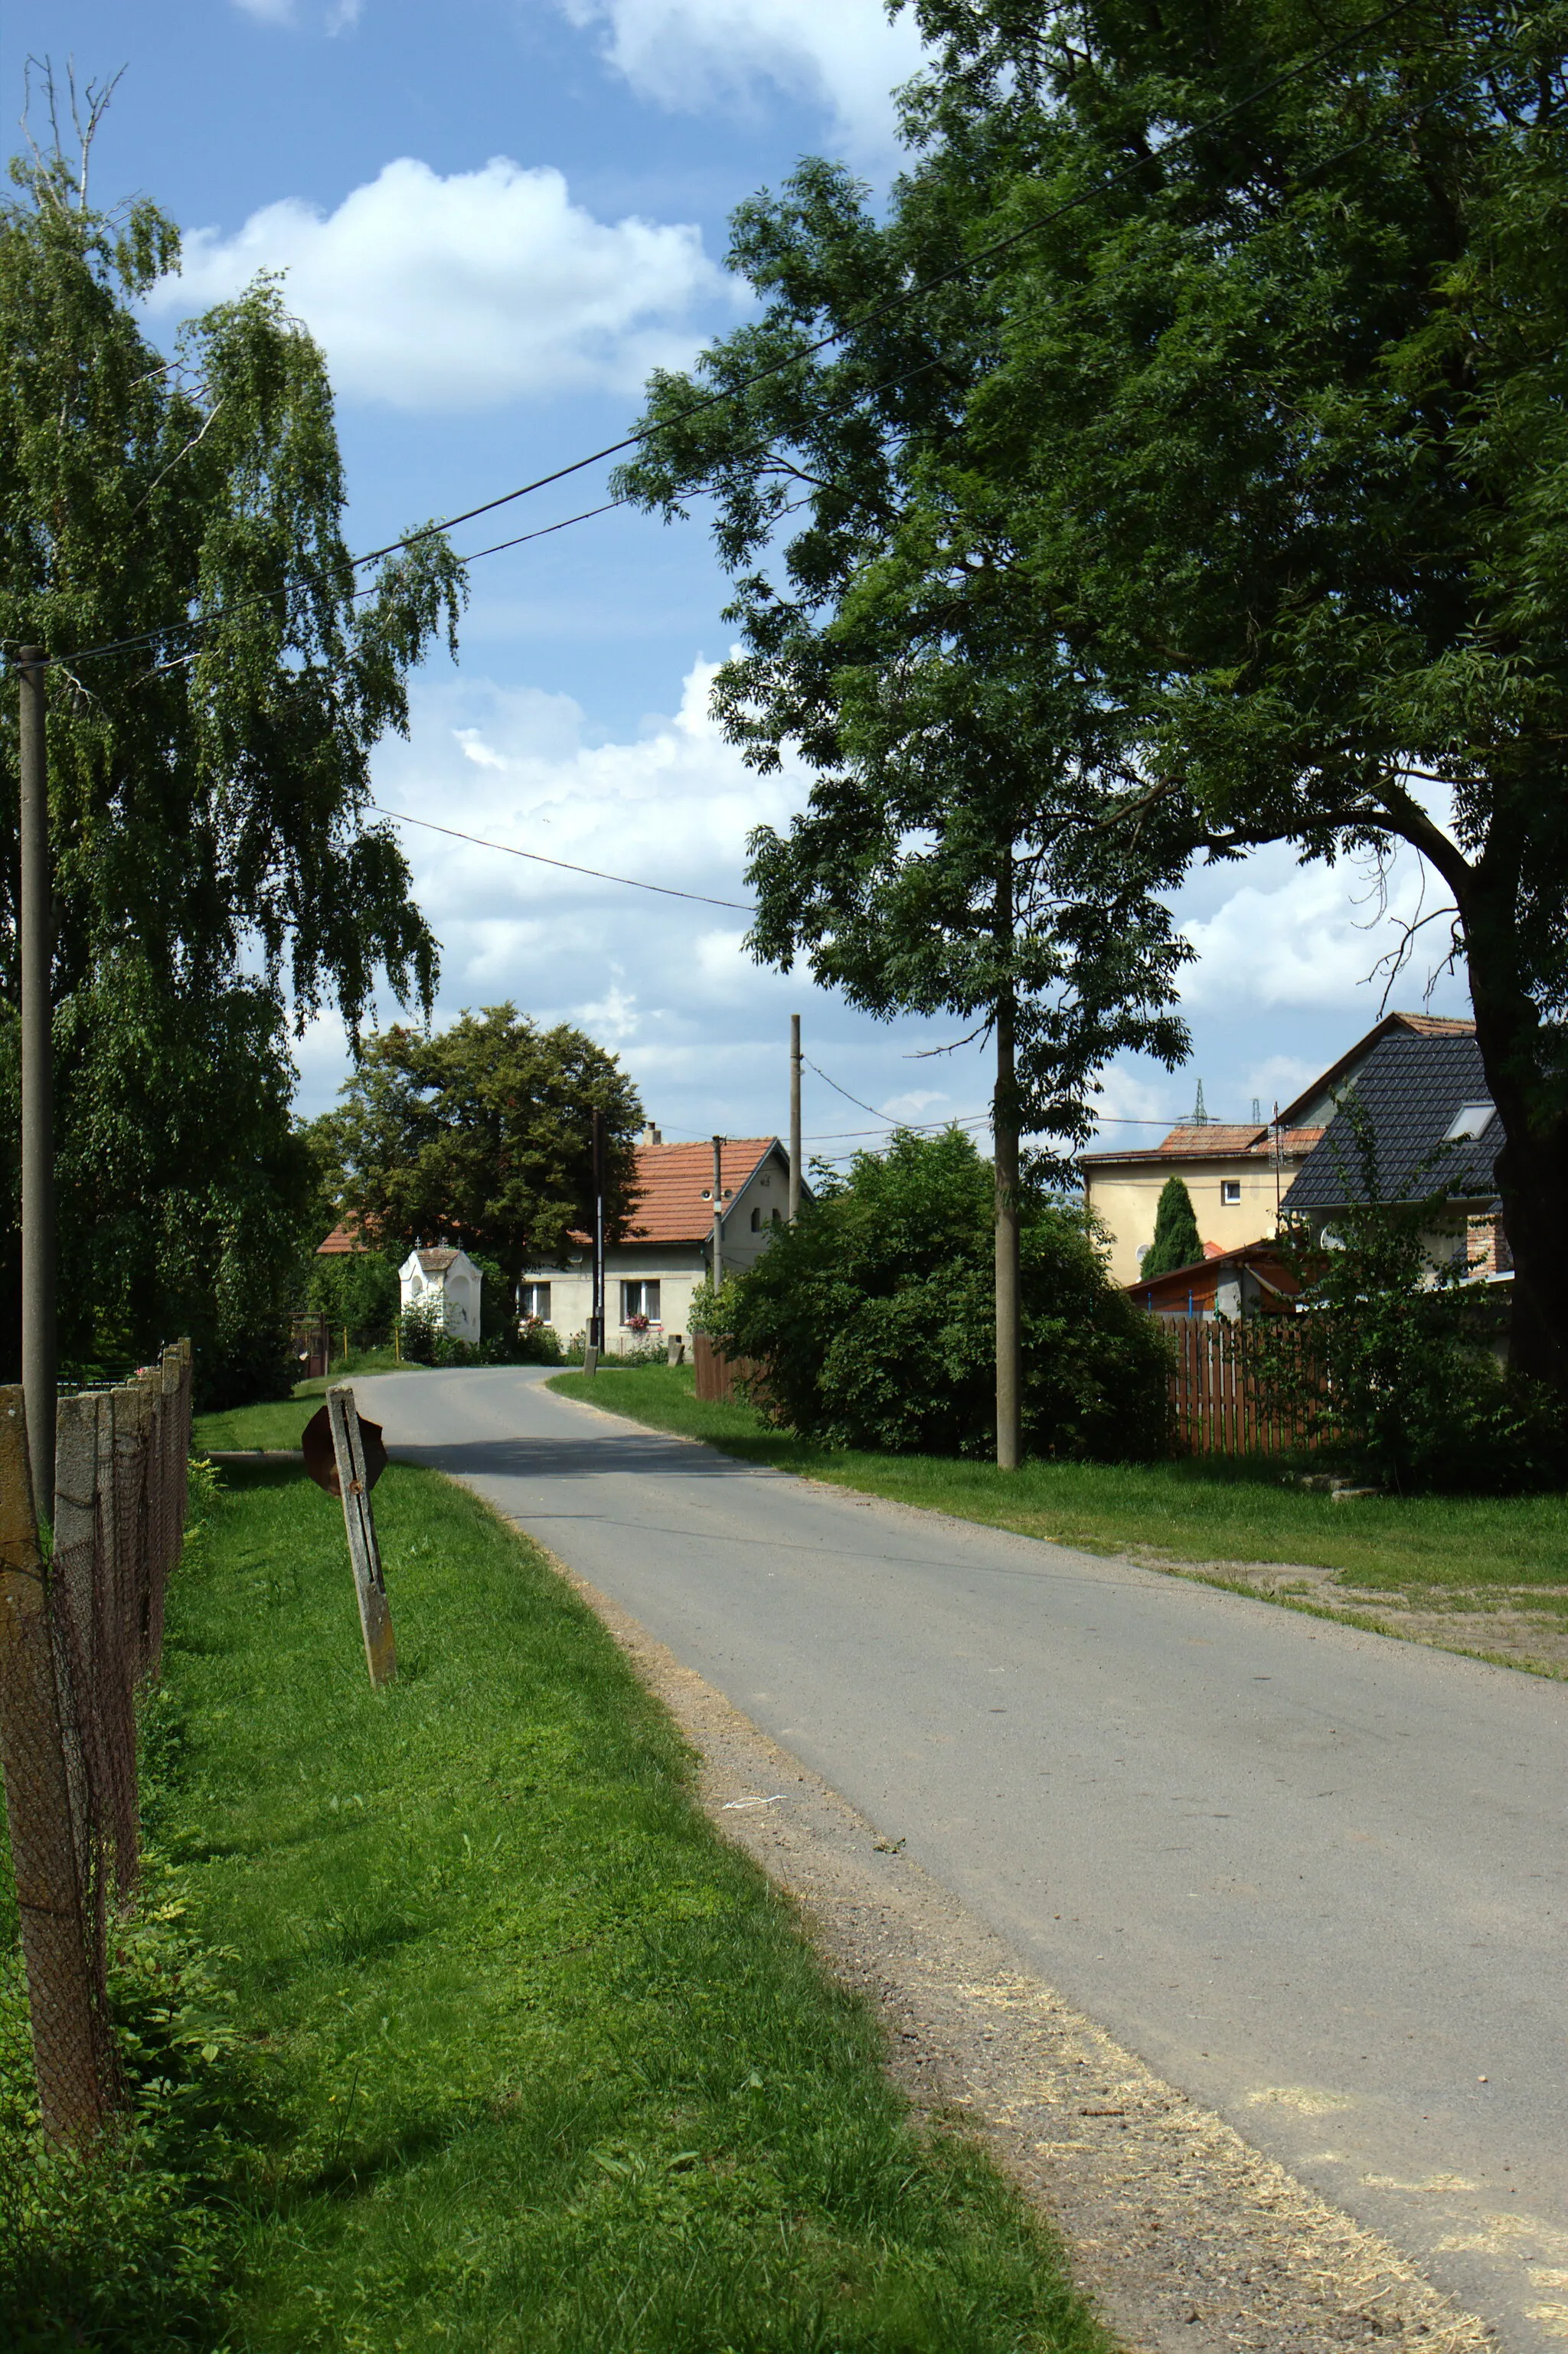 Photo showing: A road passing through the town of Budihostice, Central Bohemian Region, CZ